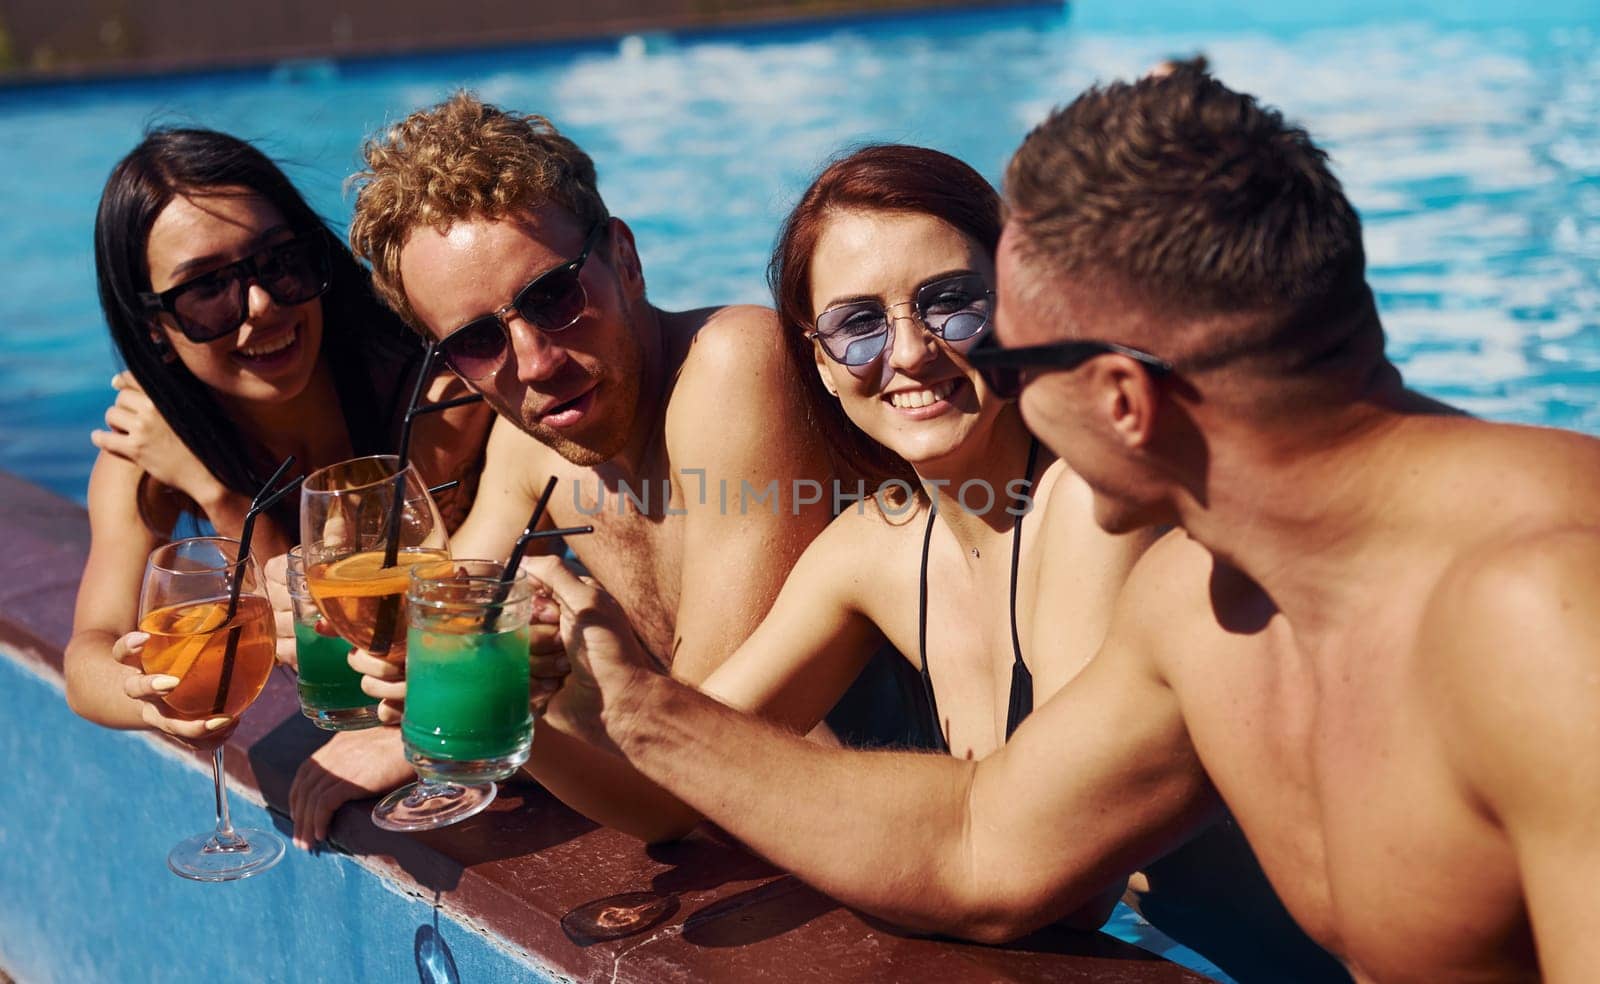 Talking and drinking. Group of young happy people have fun in swimming pool at daytime by Standret